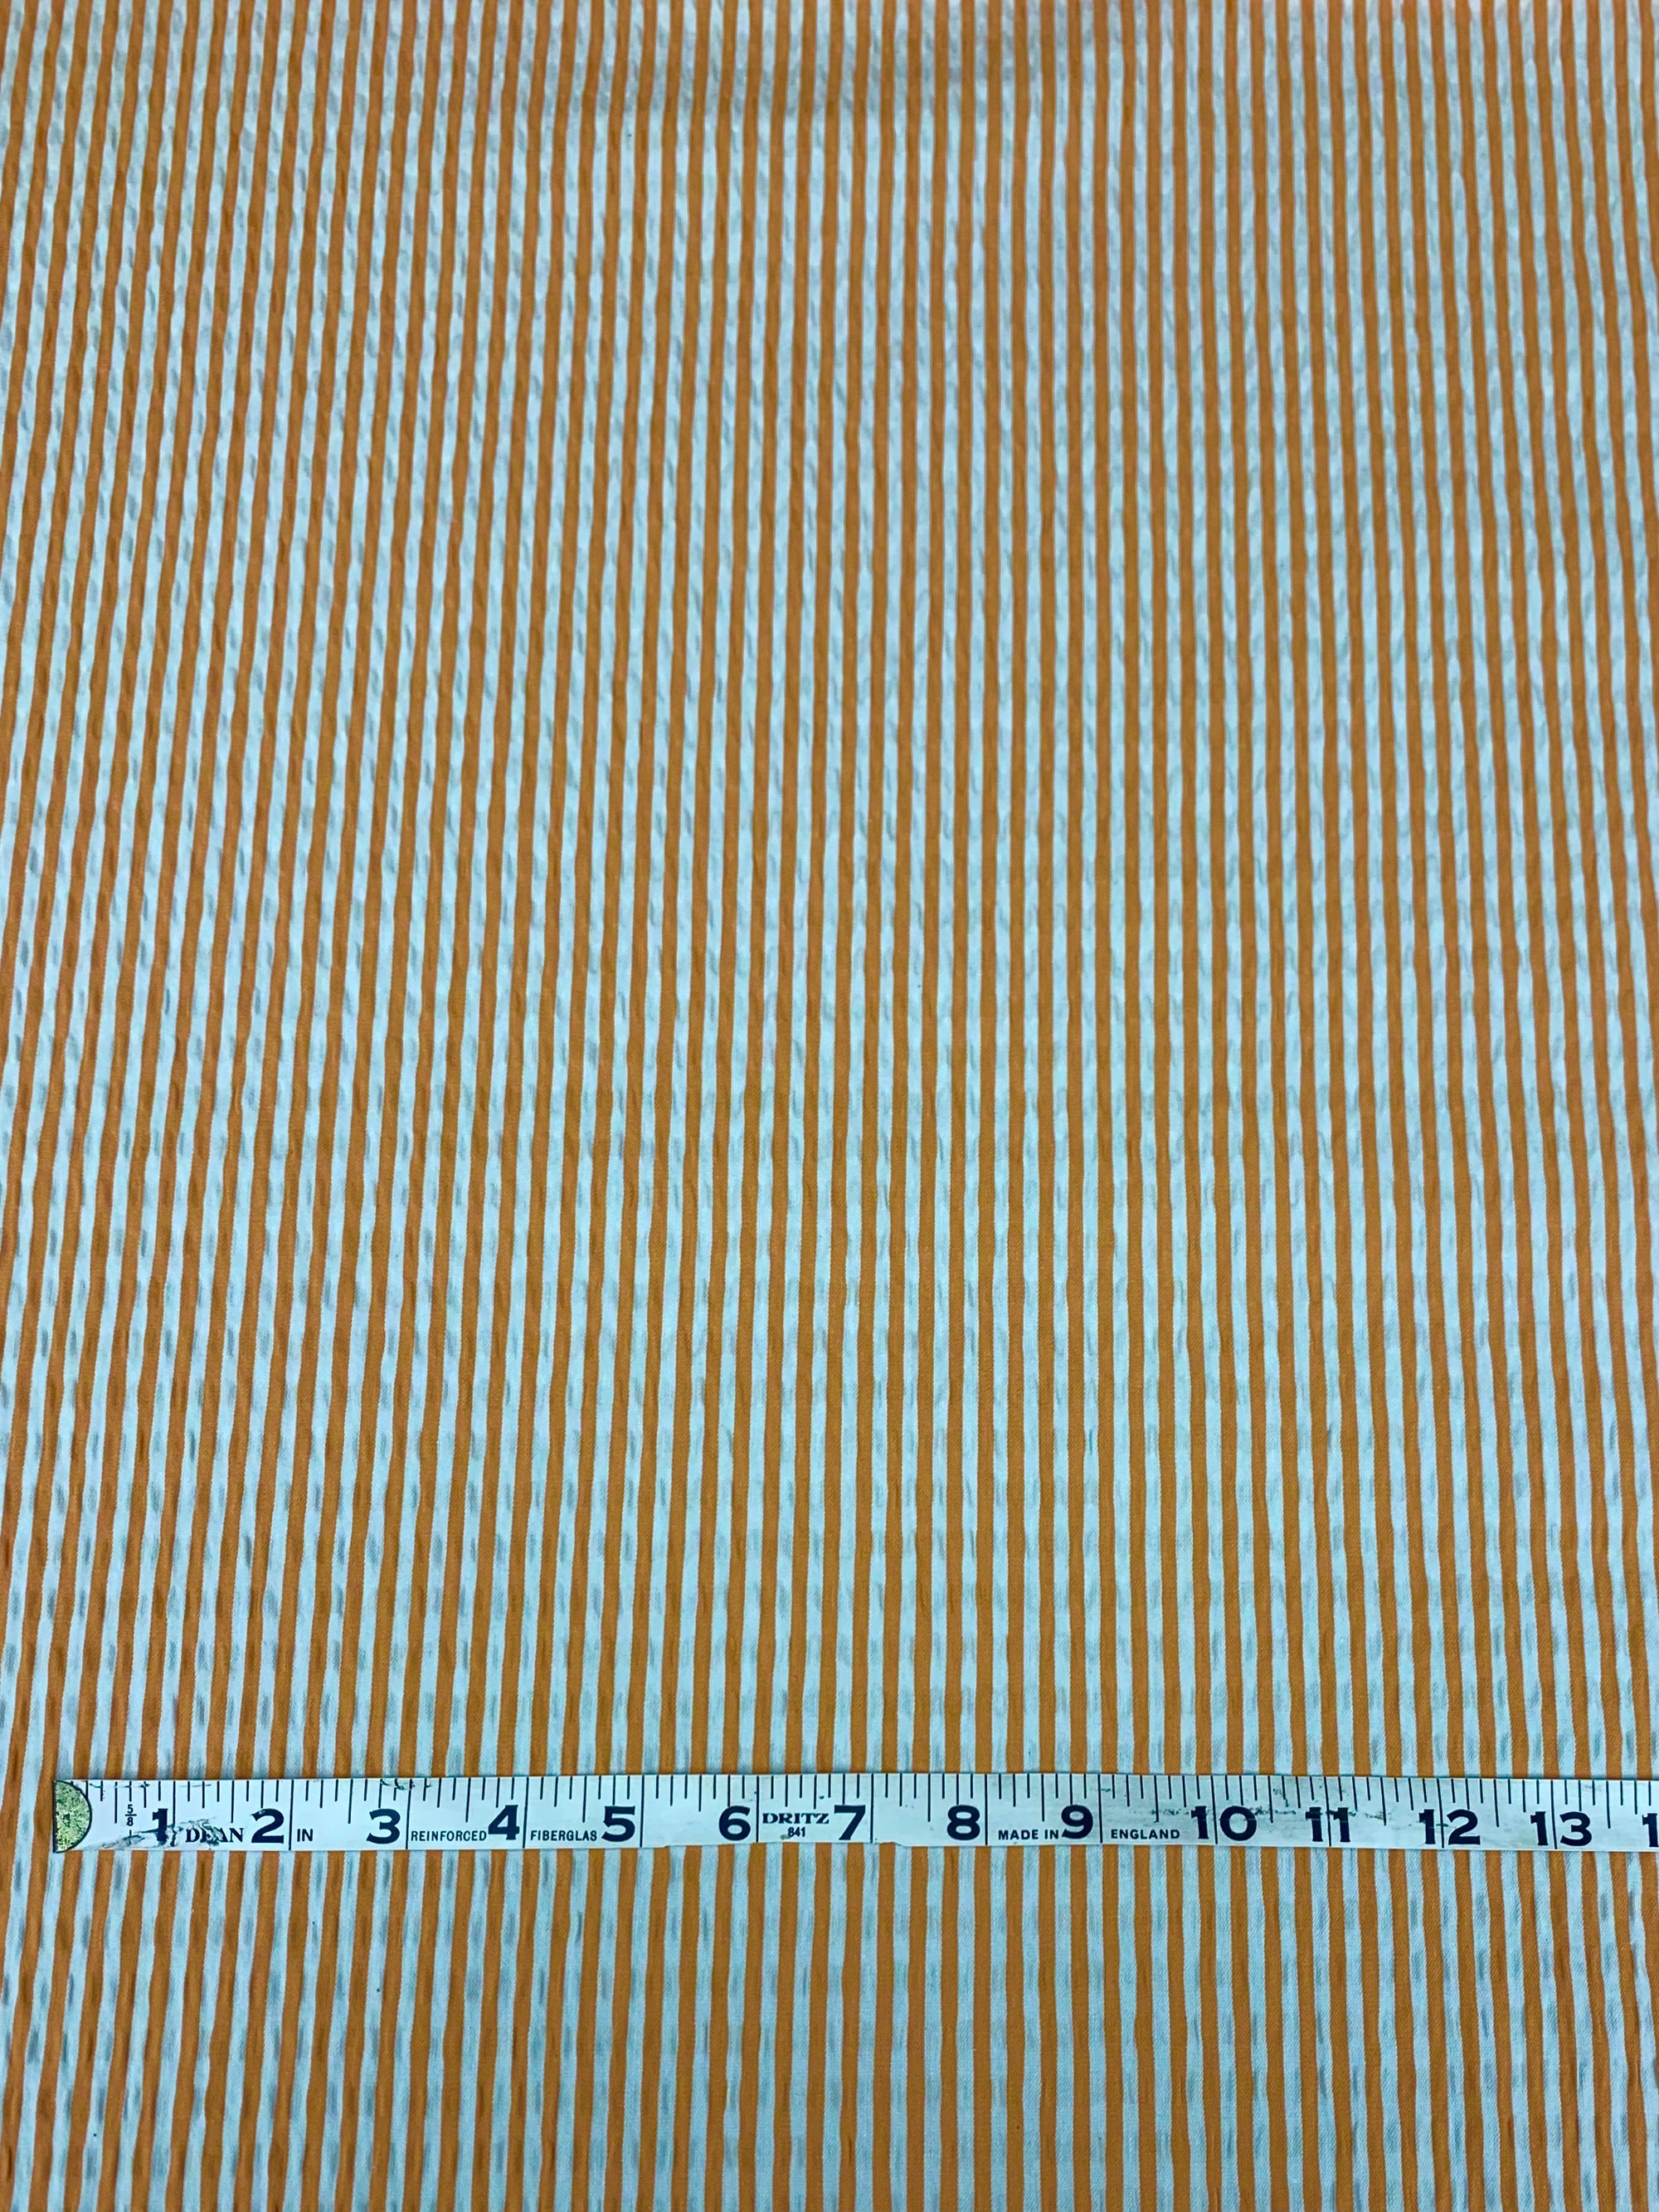 cotton seersucker in a striped Orange and White vertically  with a measuring tape on top of the fabric